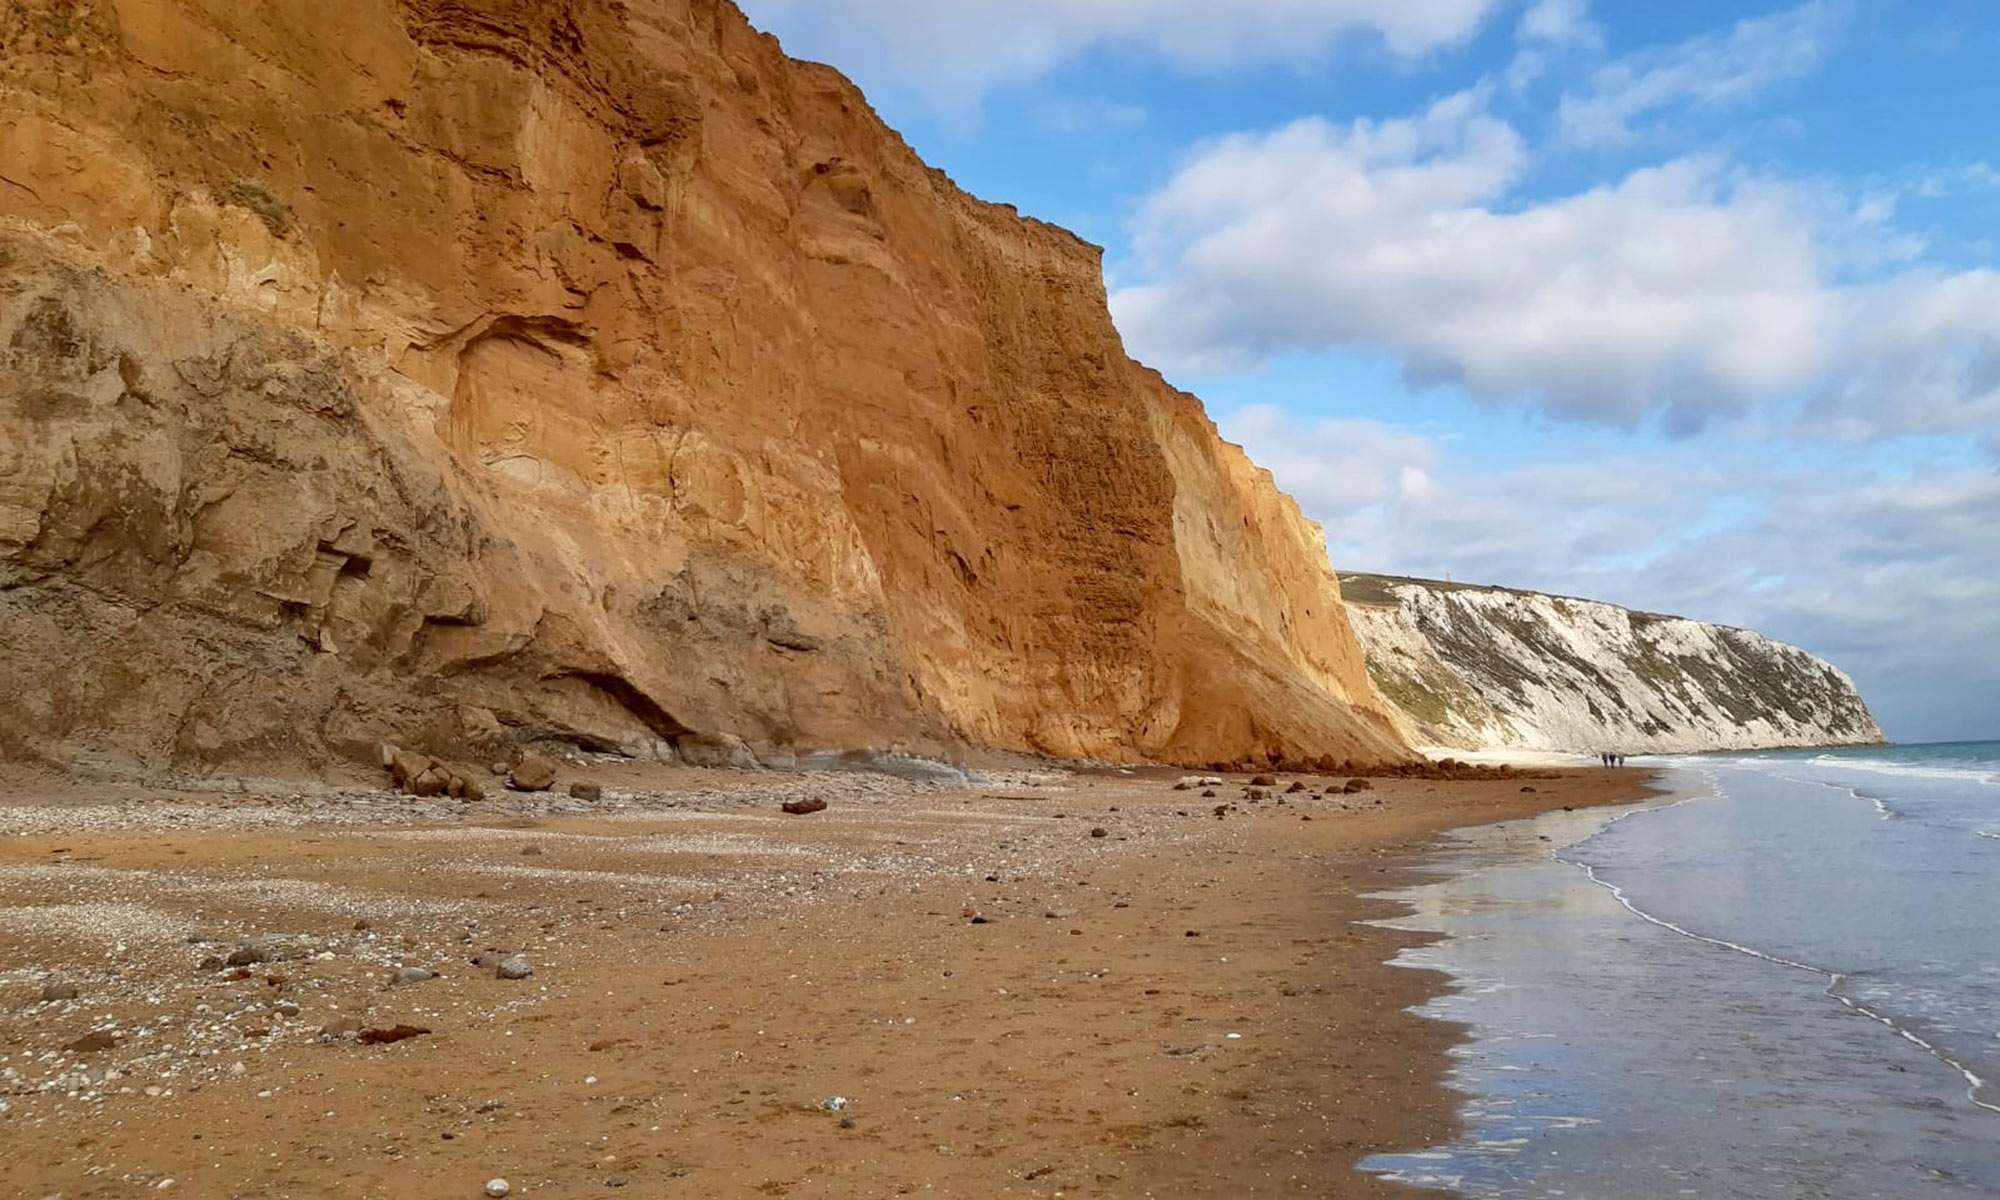 Isle of Wight cliffs and beach